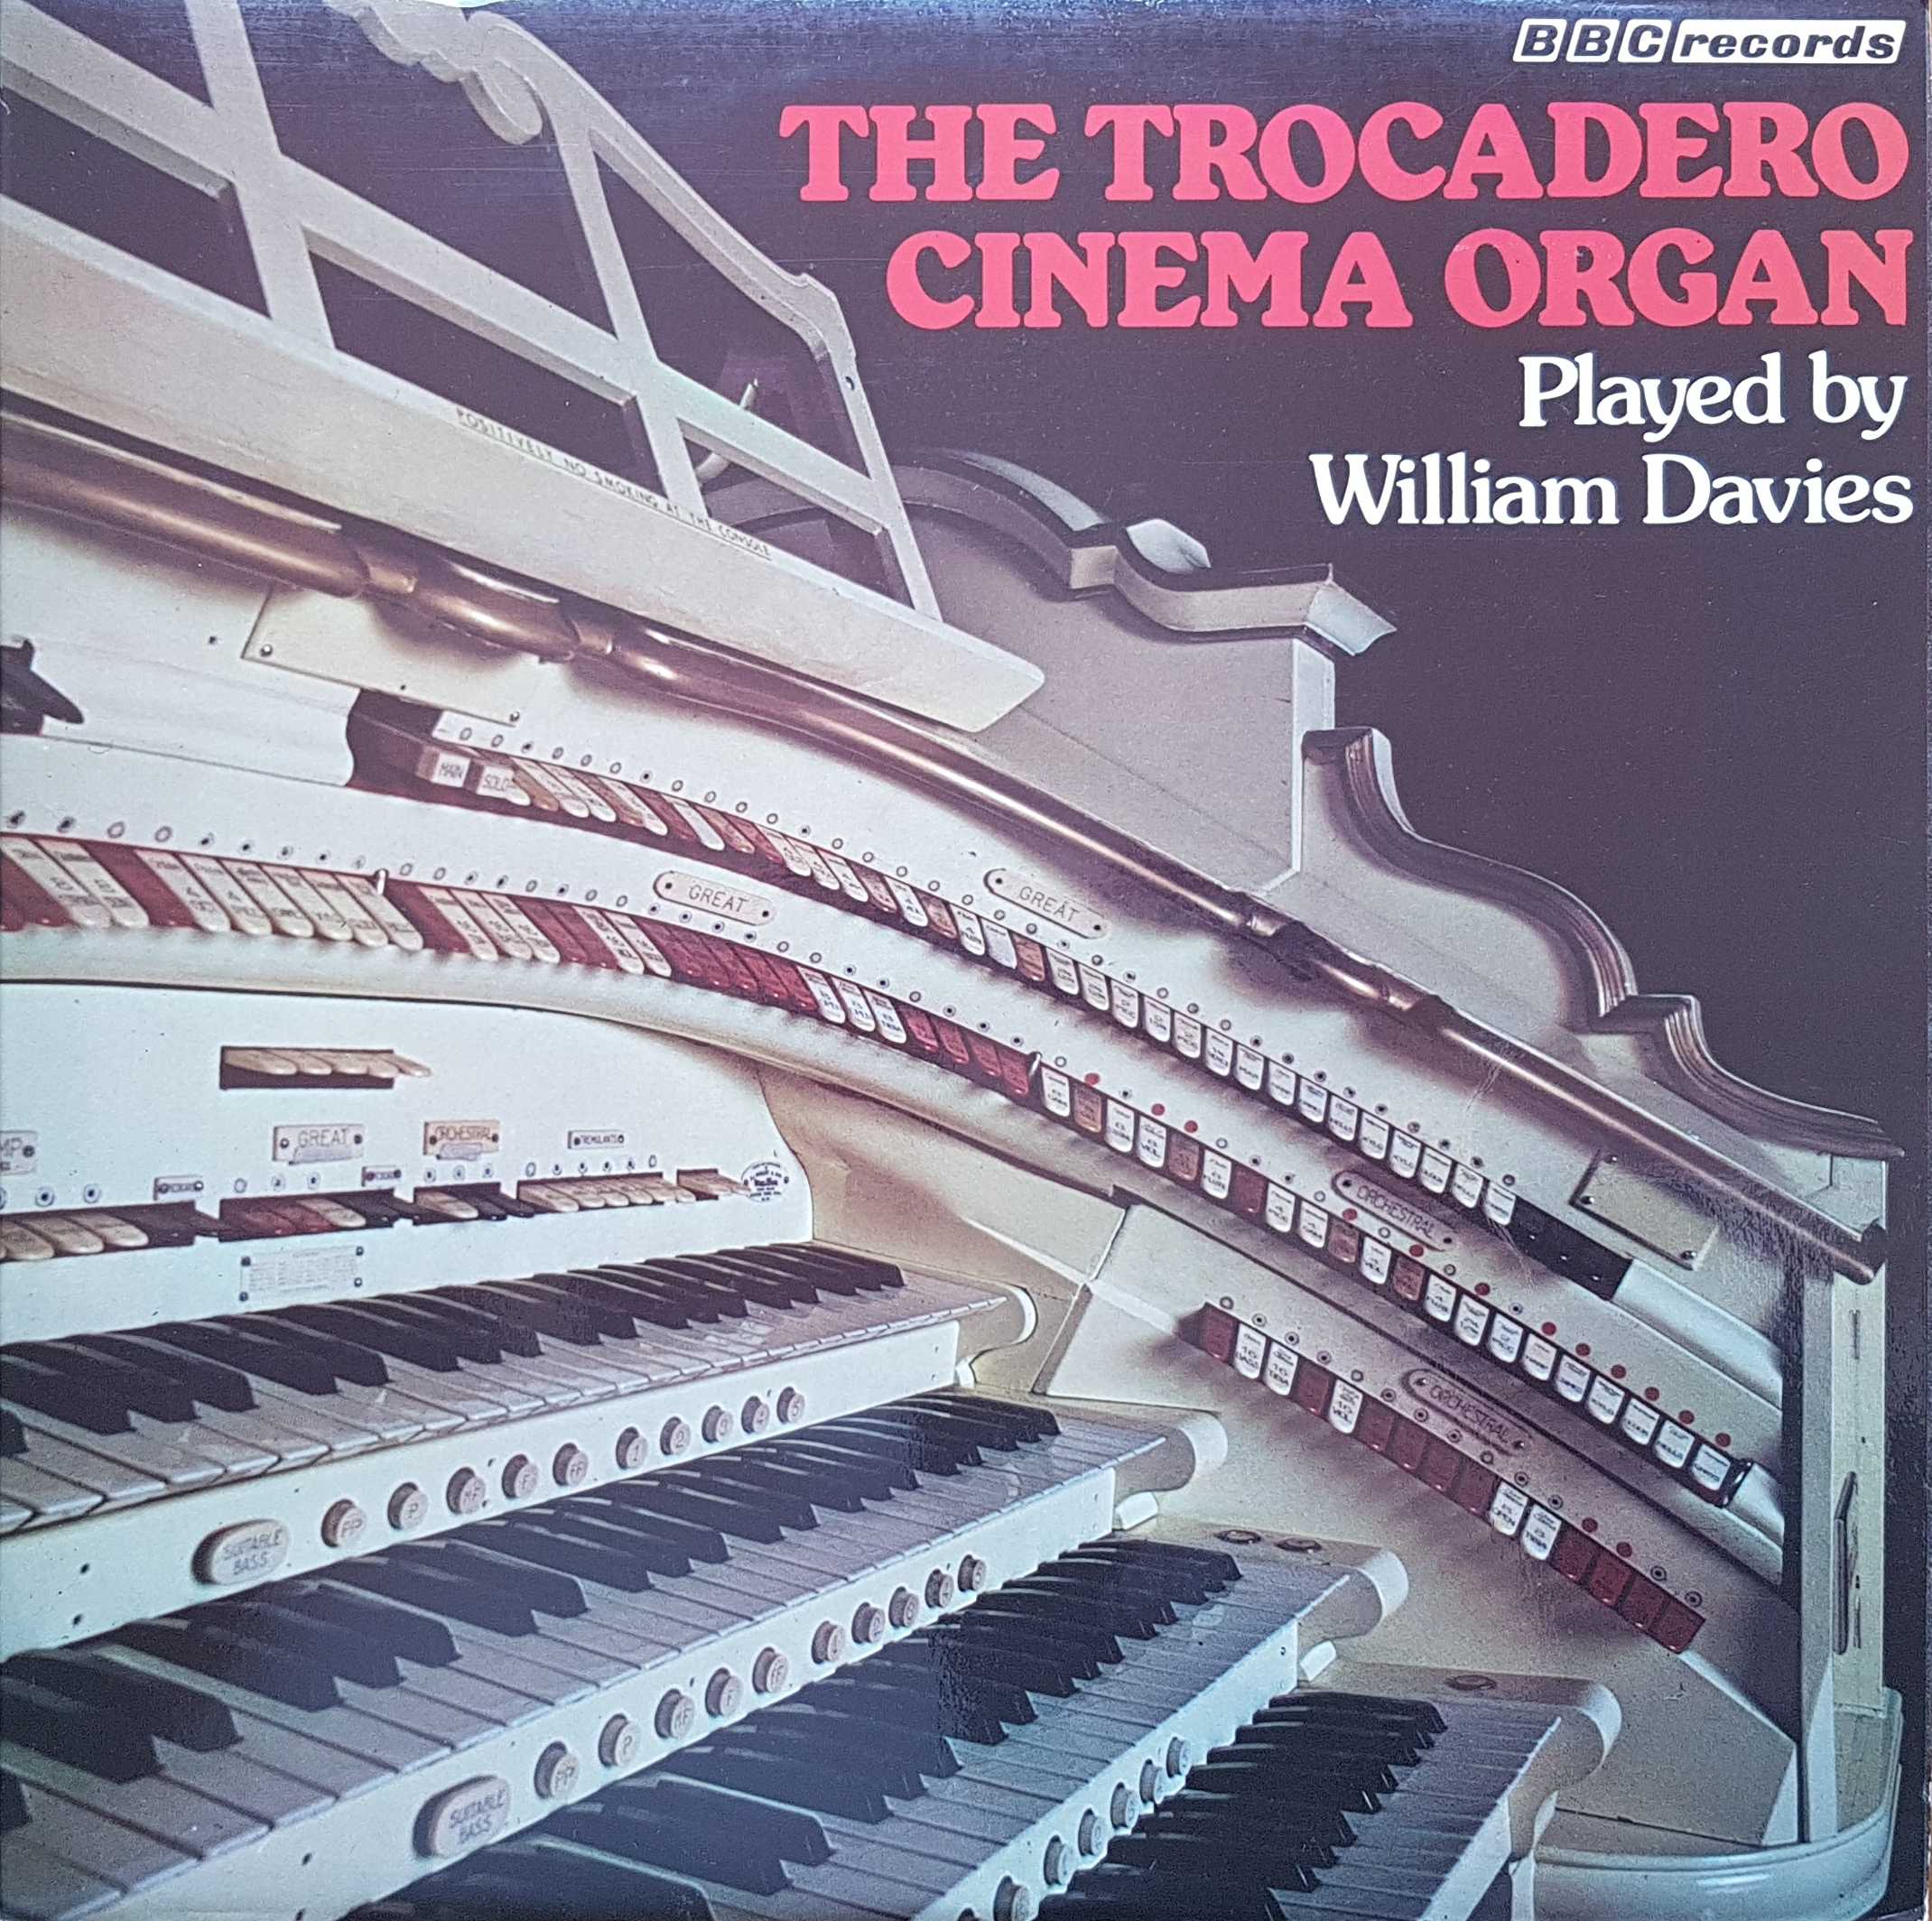 Picture of REC 349 Trocadero cinema by artist William Davies from the BBC albums - Records and Tapes library